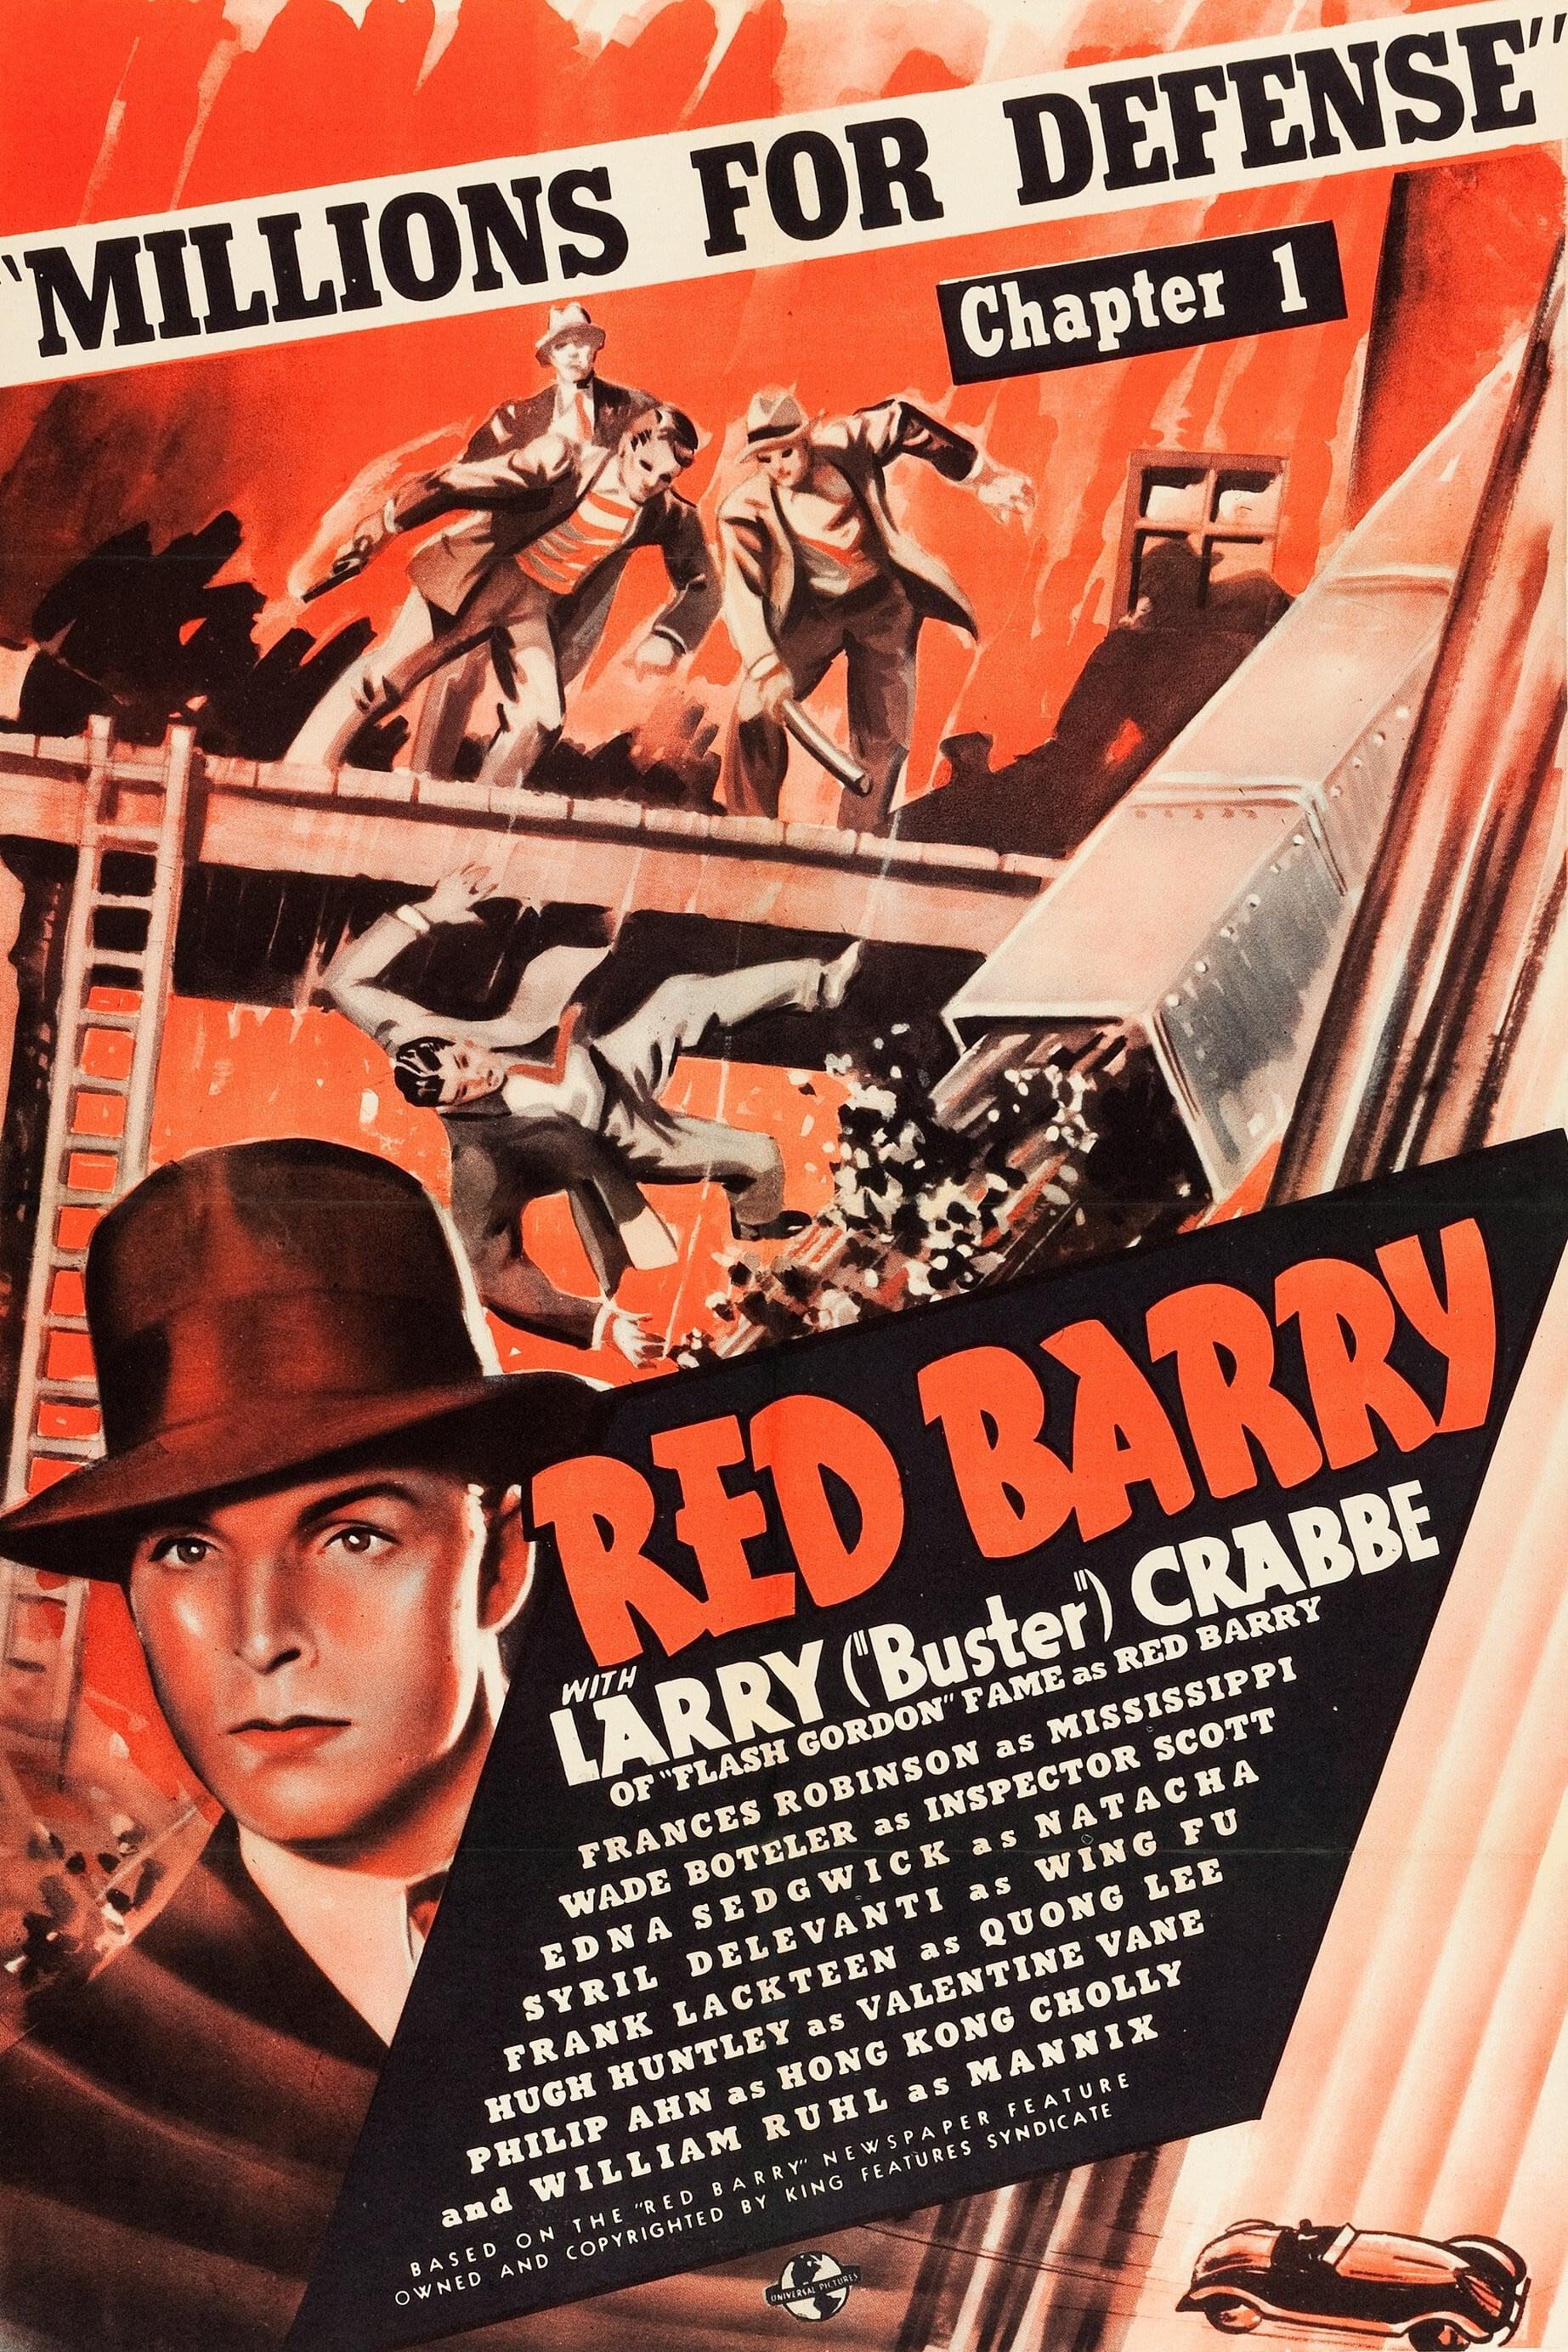 Red Barry poster